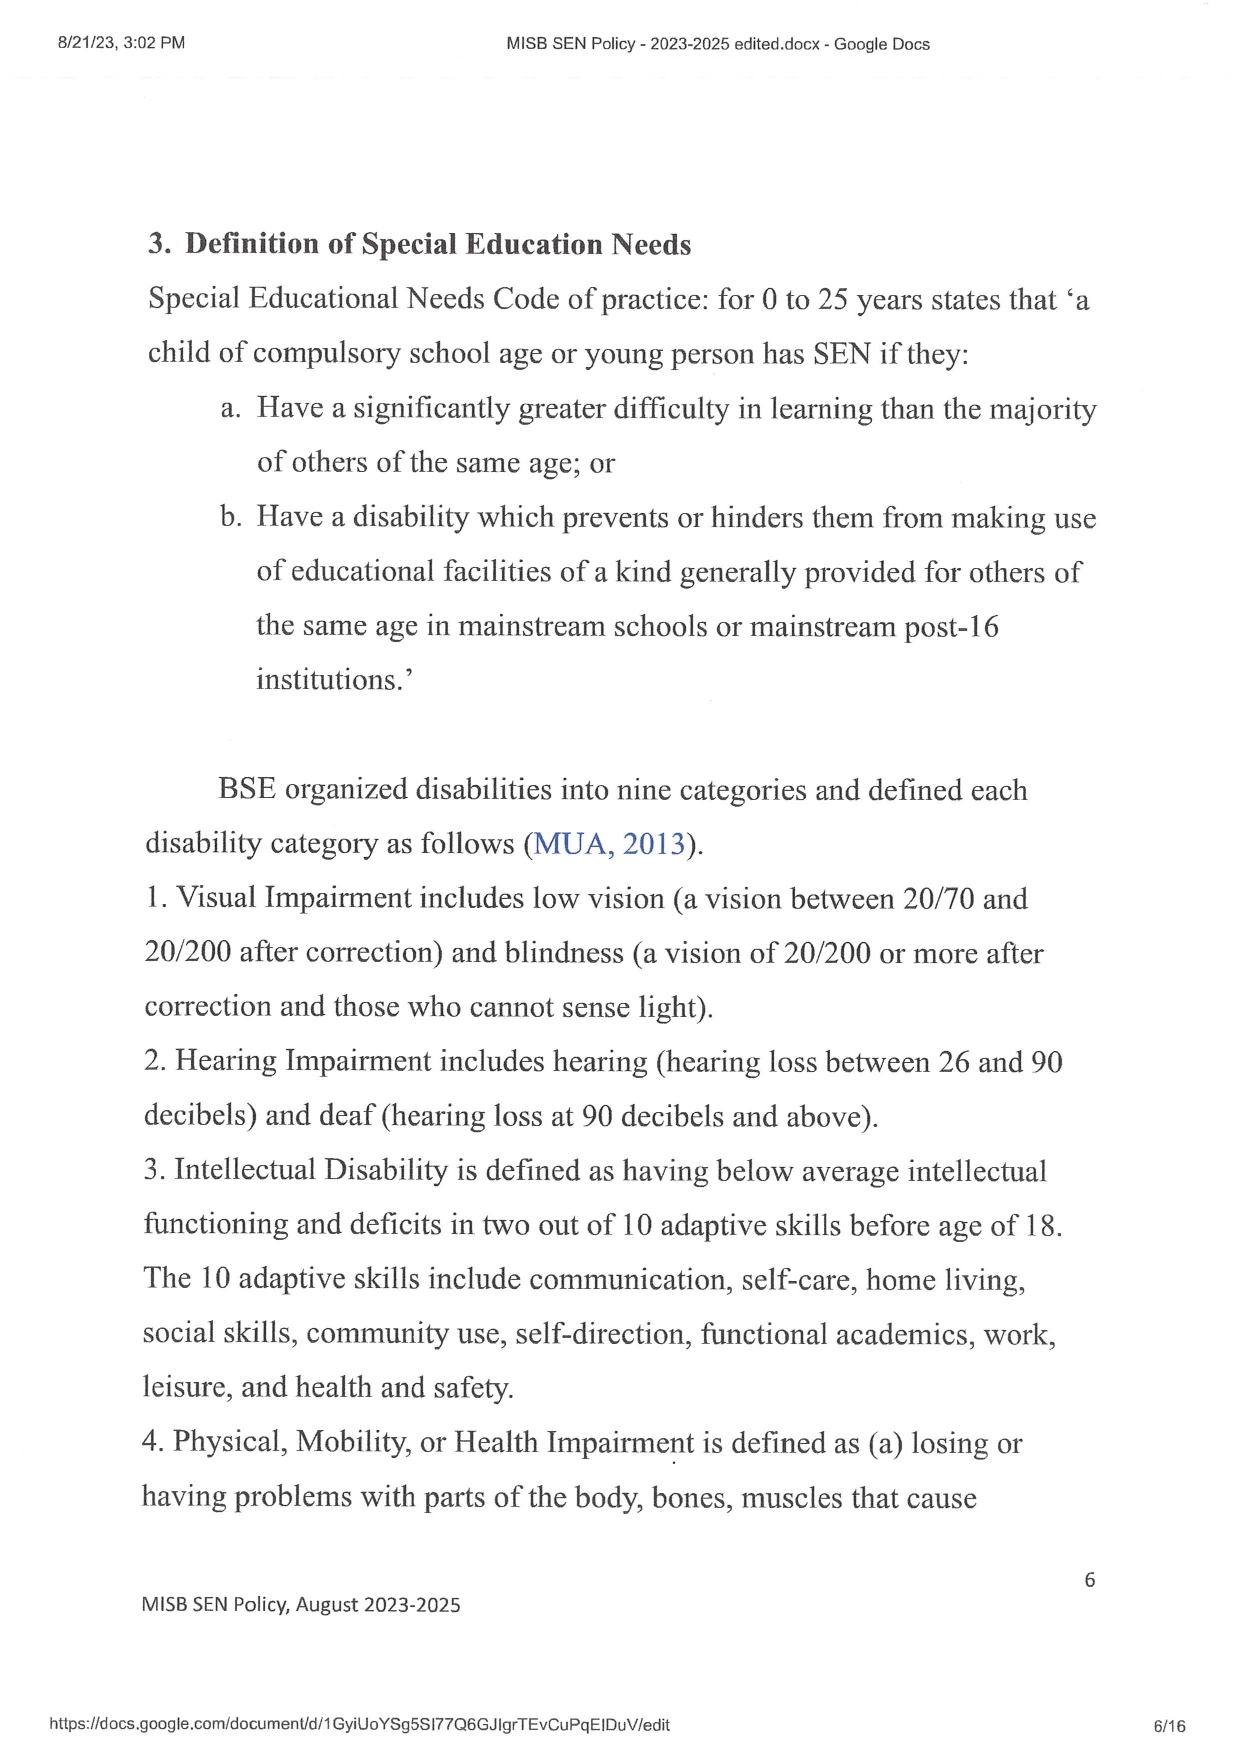 Special Educational Needs SEN Policy 2023 2025 page 0006